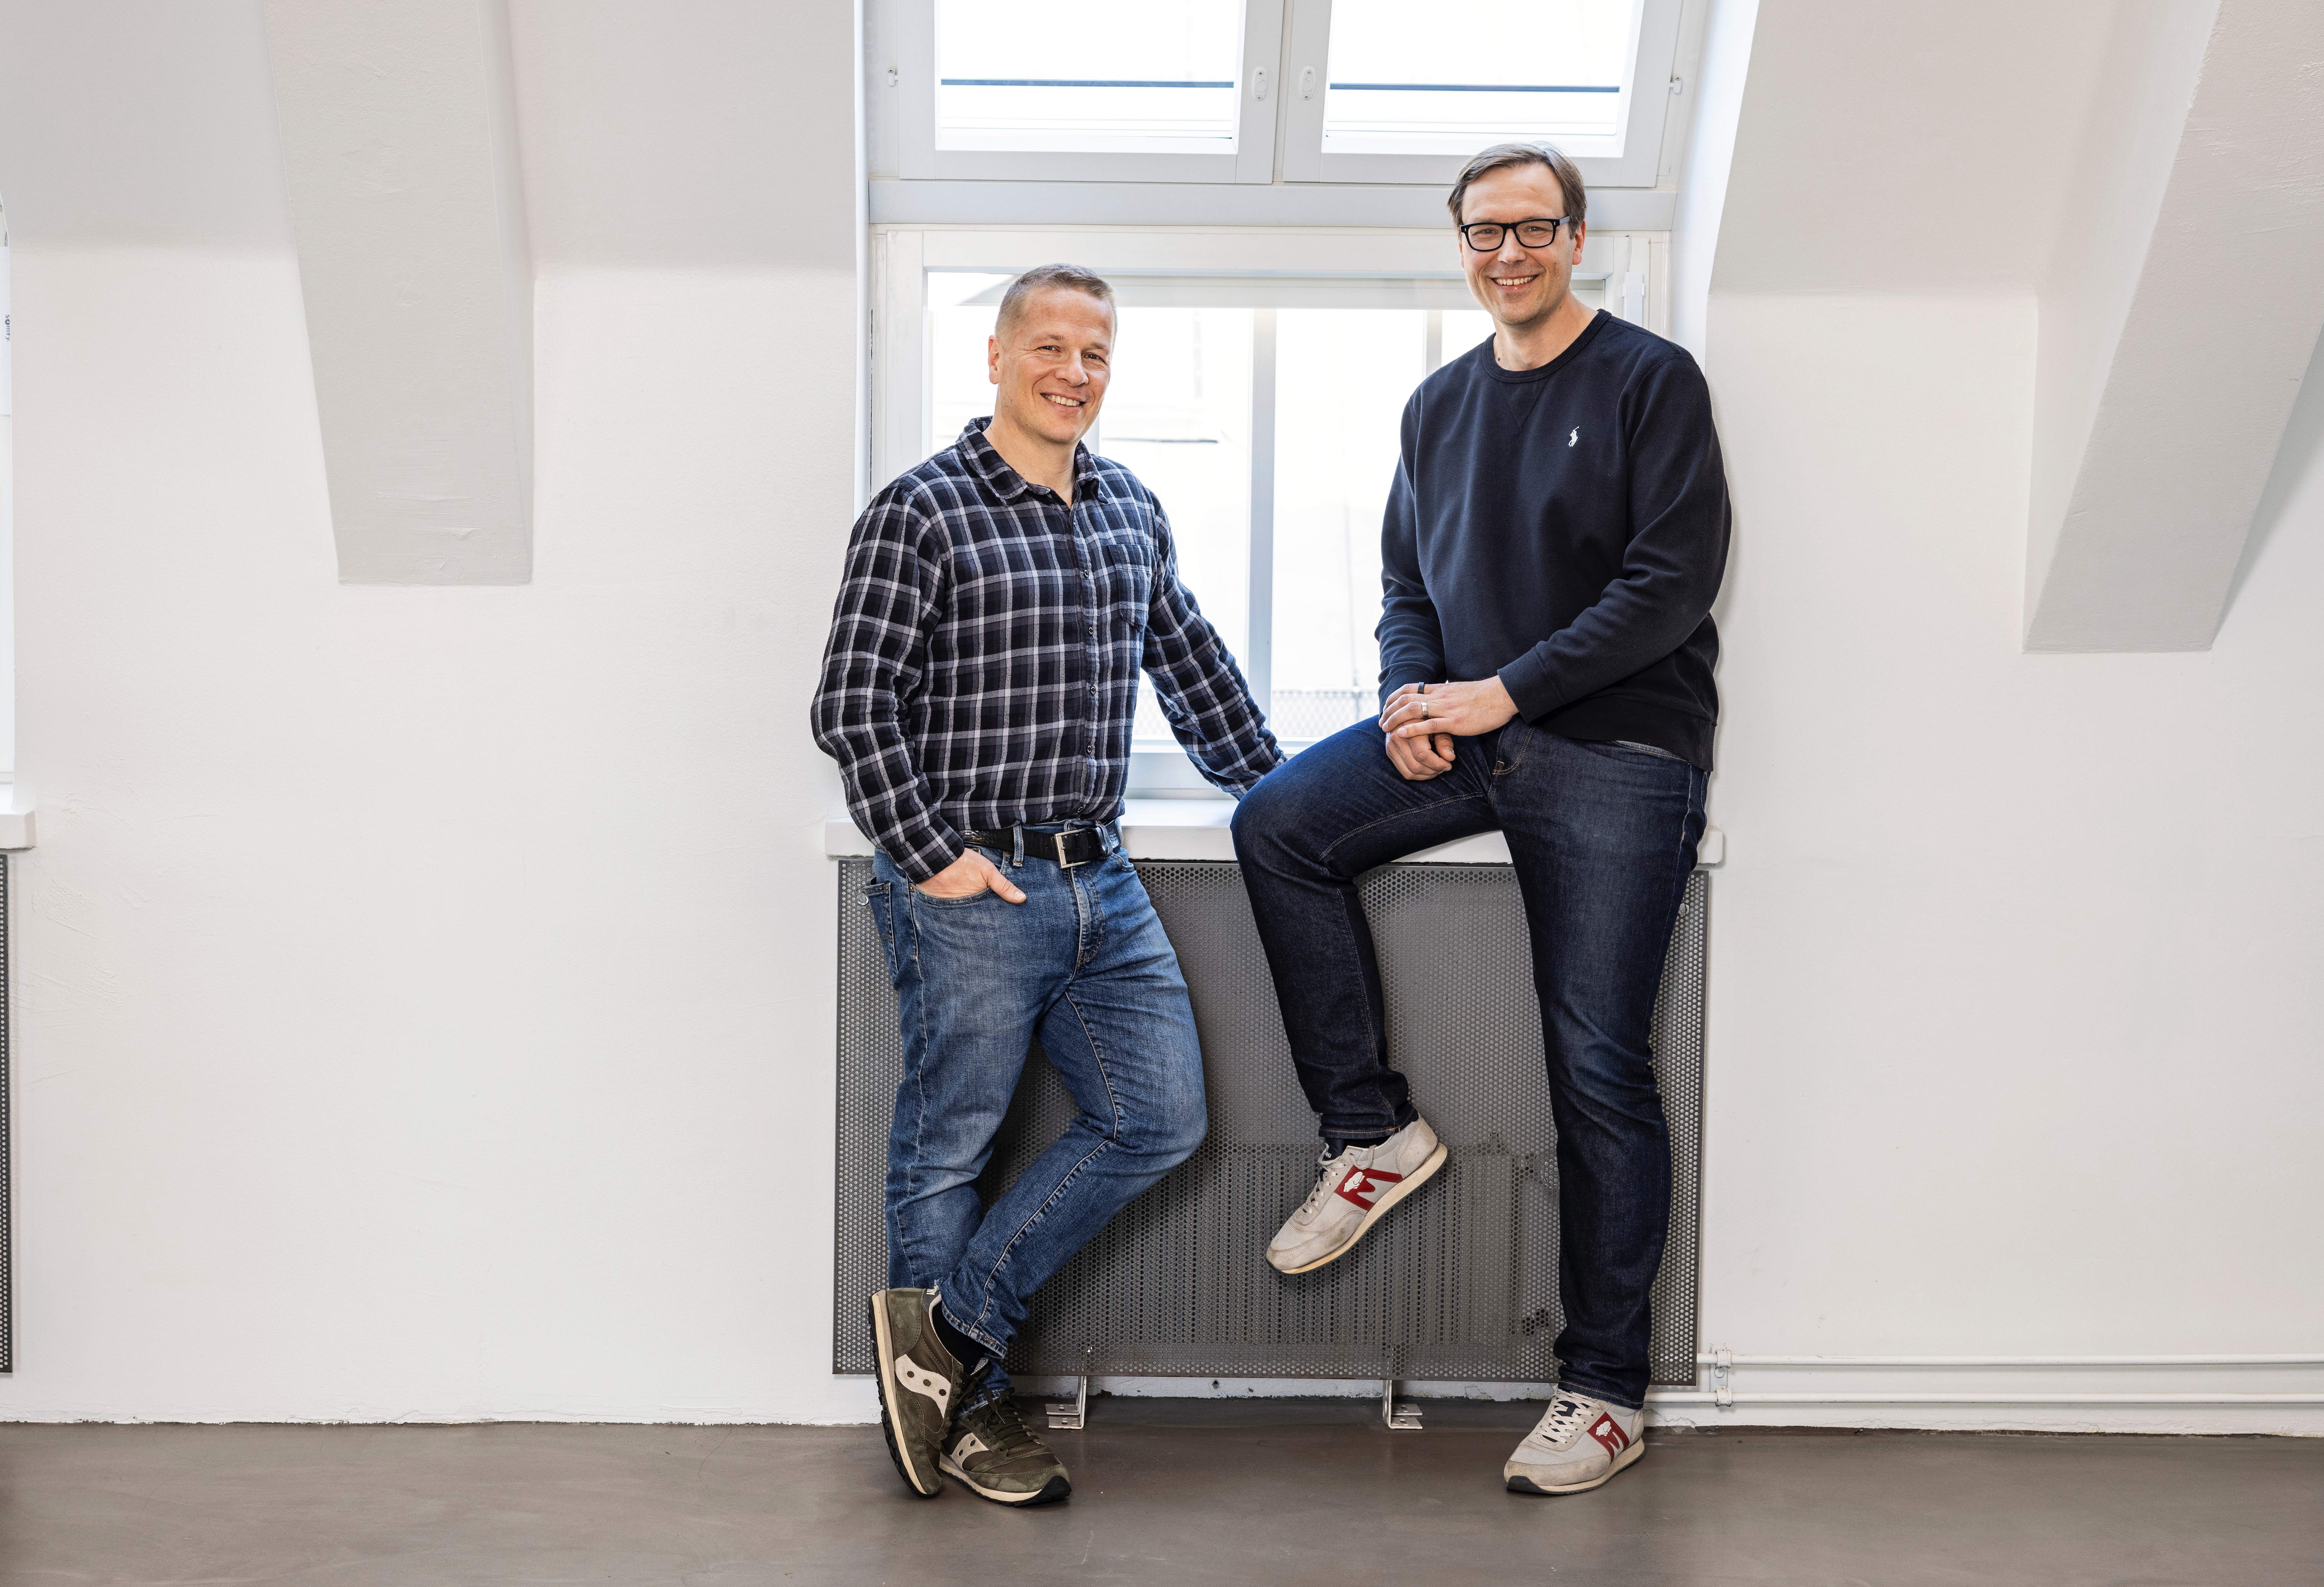 Finnish VC firm Lifeline Ventures closes $163M fund for early-stage startups 3